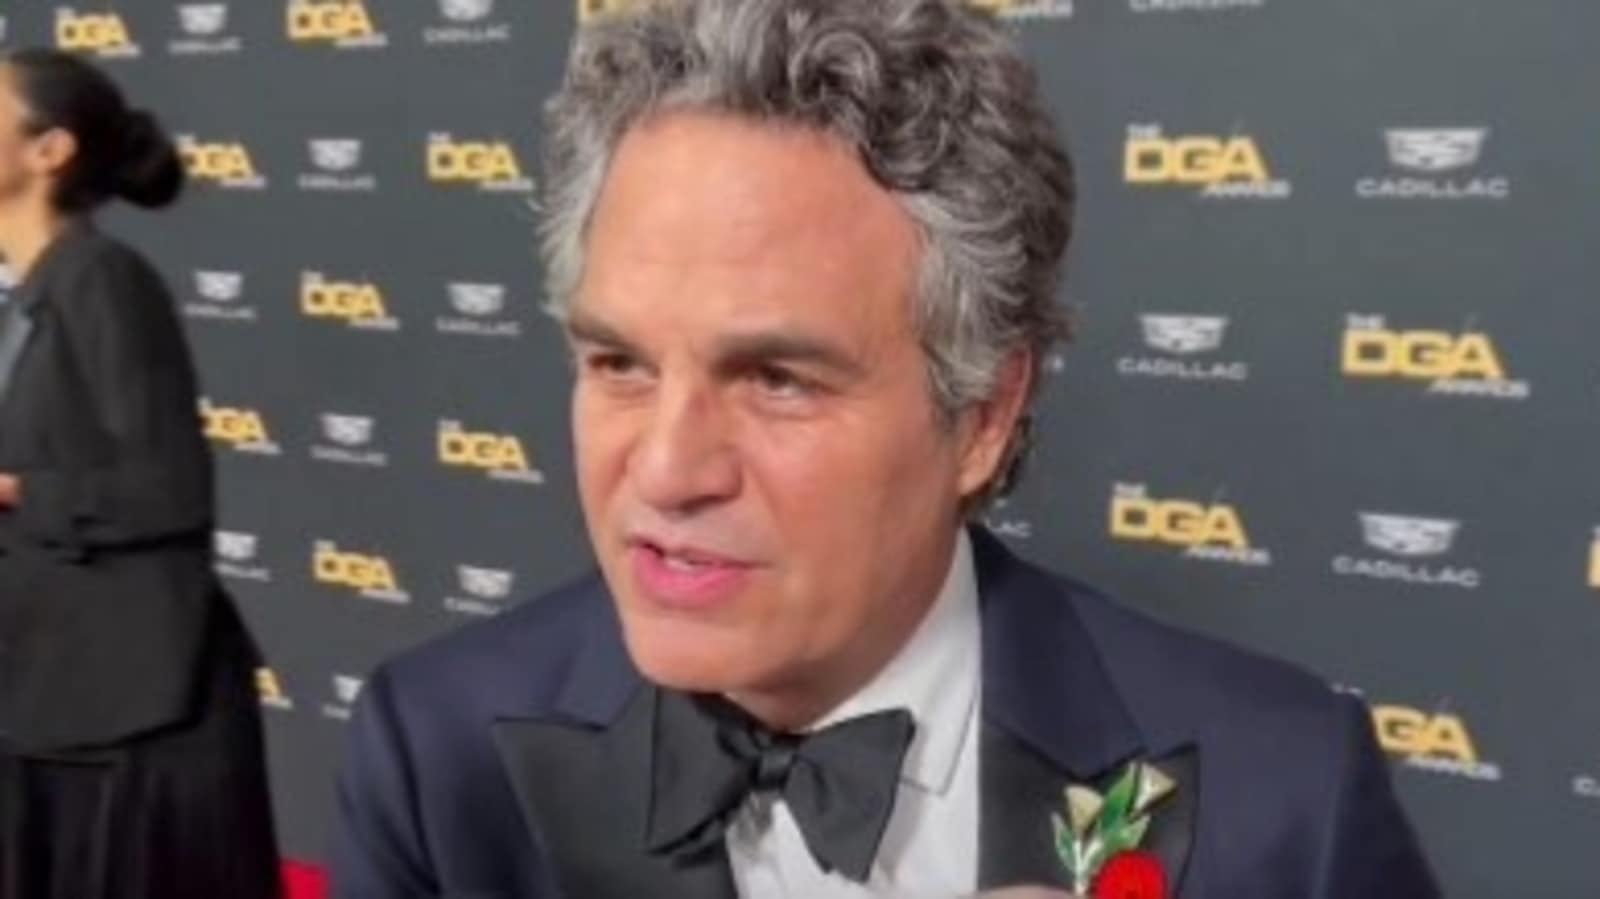 ‘Give peace a chance’: Mark Ruffalo wears peace lily pin at DGA awards, calls for ceasefire in Gaza